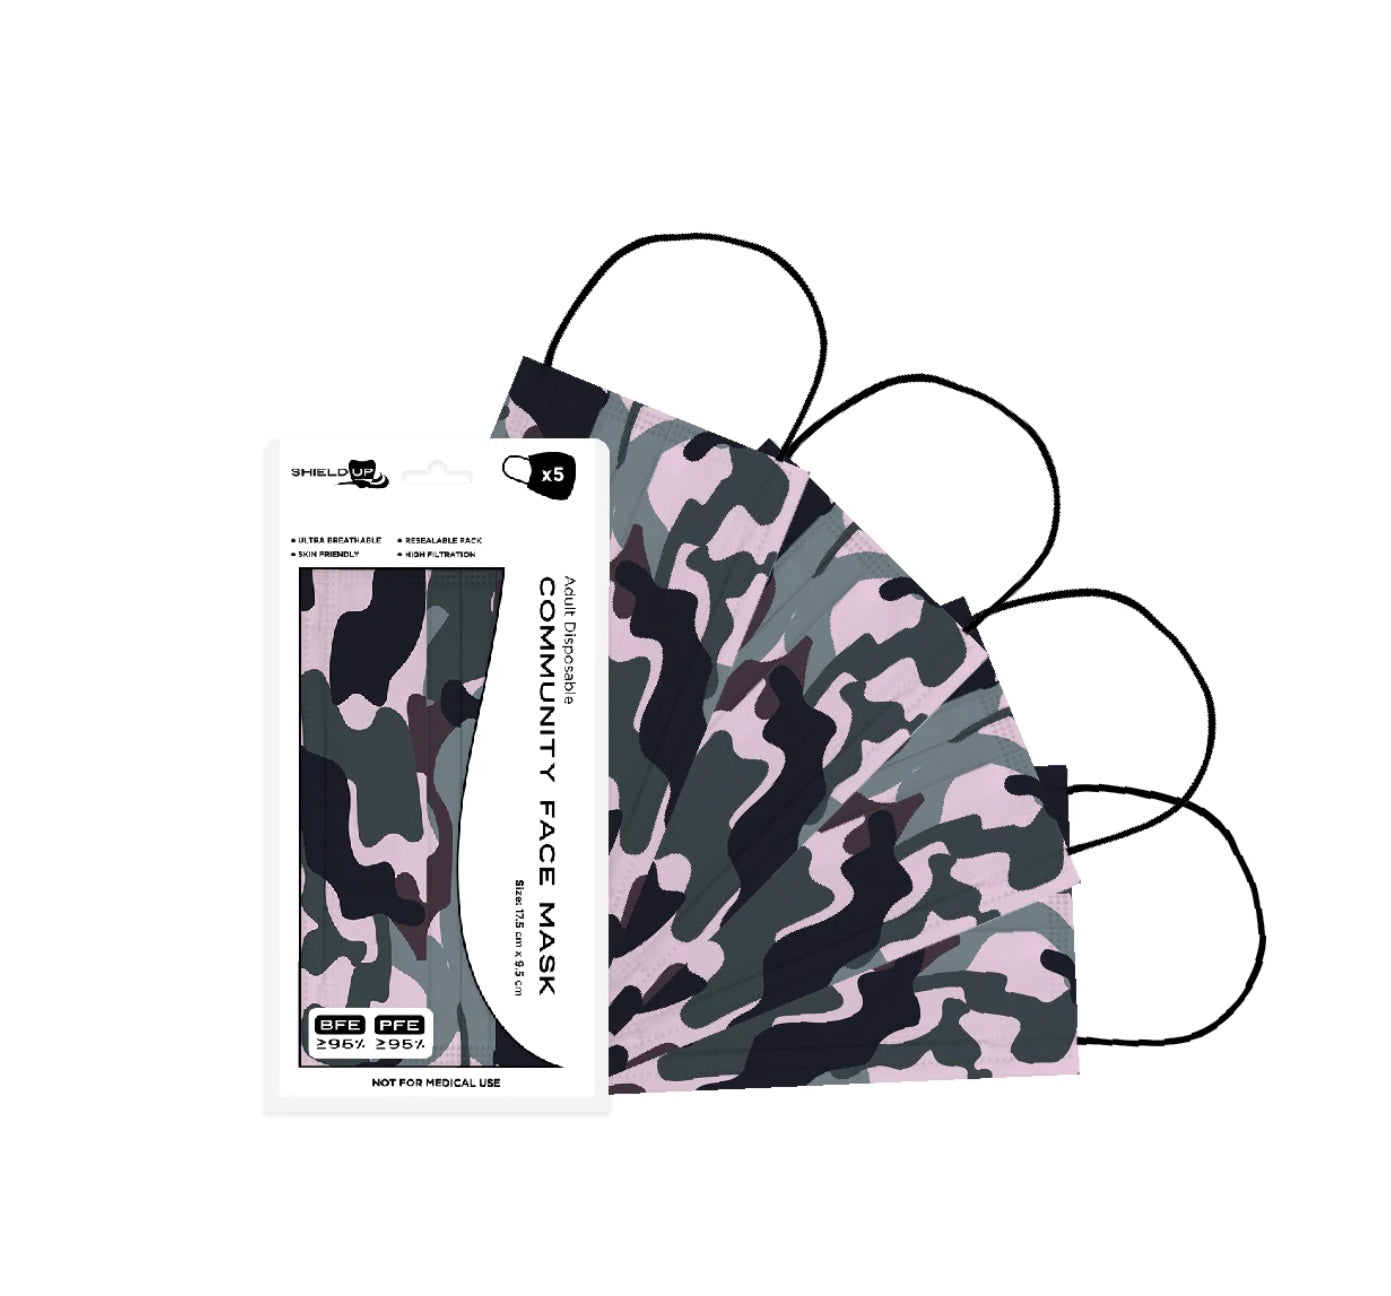 SHIELD UP Disposable Face Mask - Camo (5 Pack)